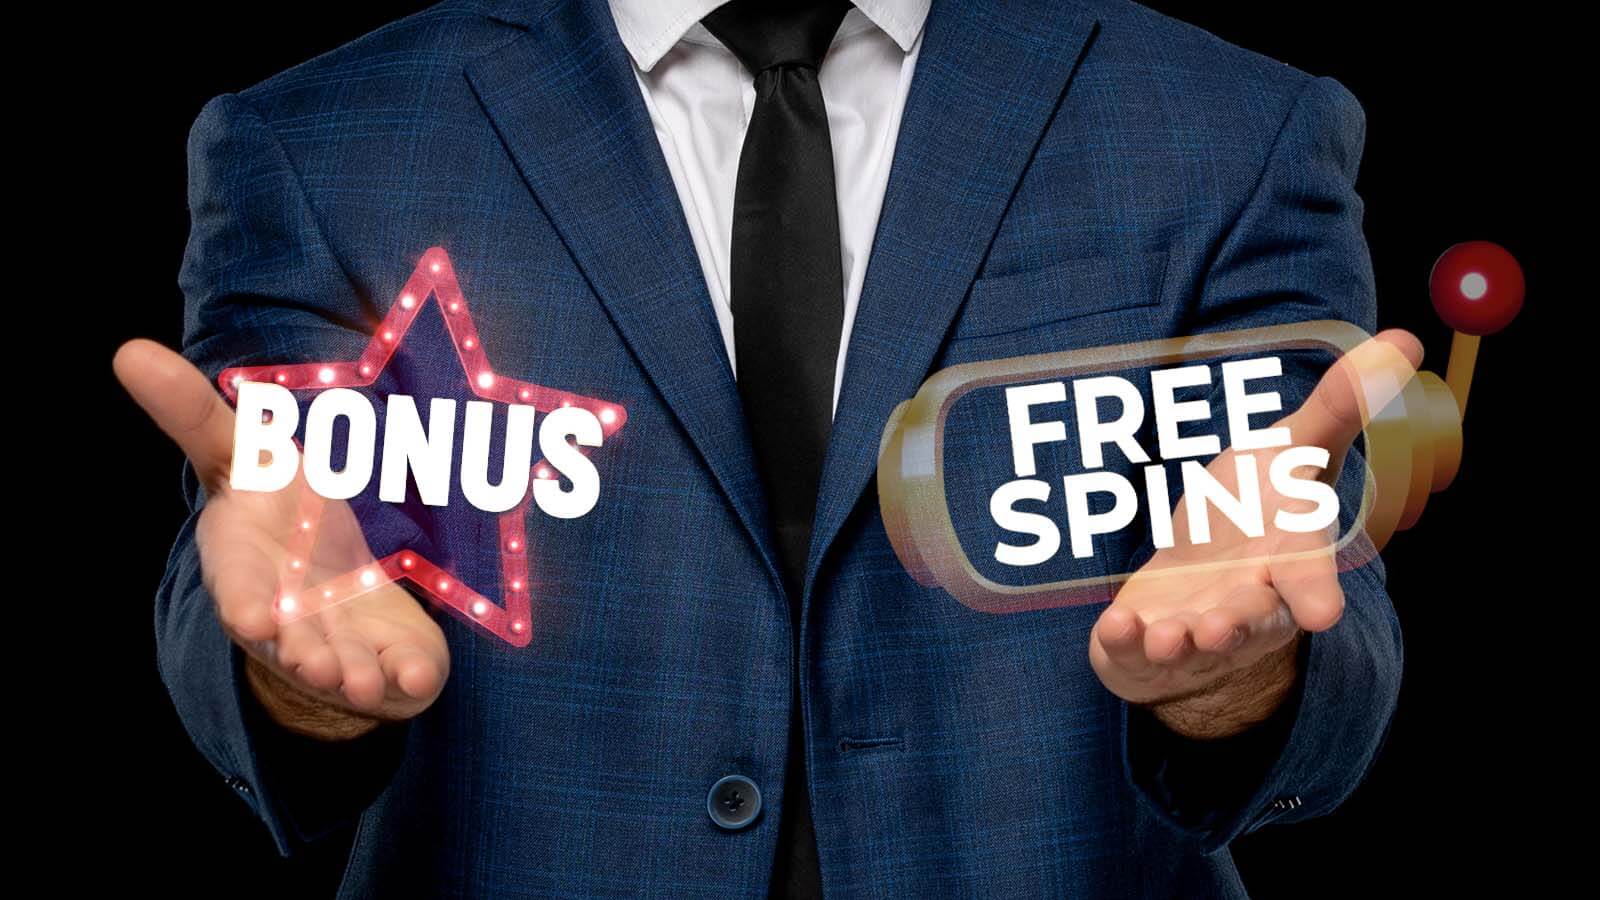 How to Decide Between Casino Bonuses or Free Spins